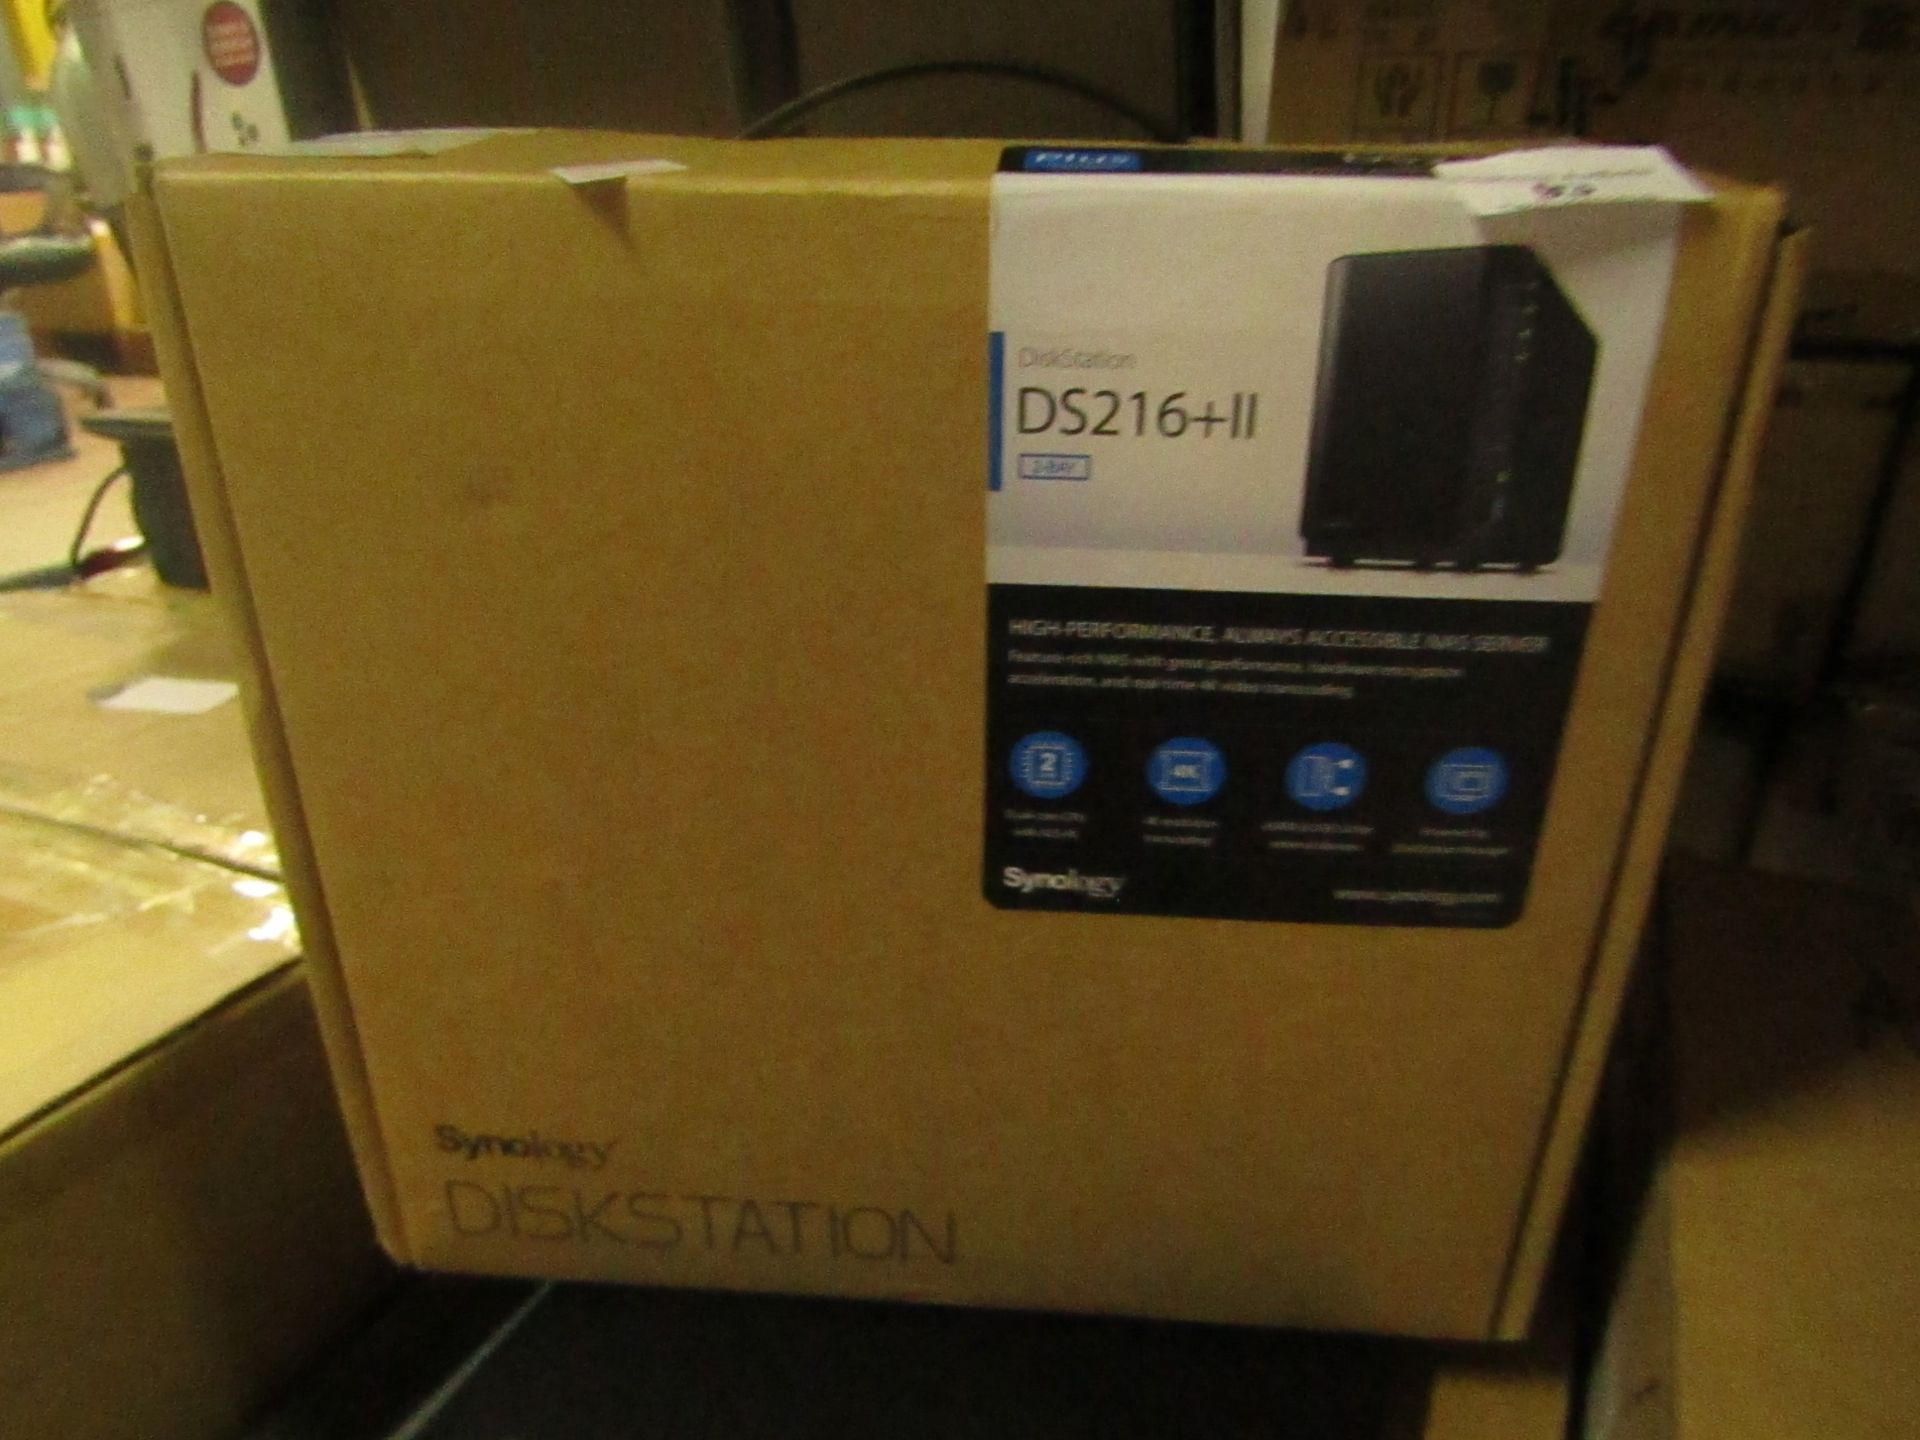 Synology Disk Station DS214 2-Bay Diskless NAS Server - SATA 3Gb/s, untested and boxed. RRP £264.99